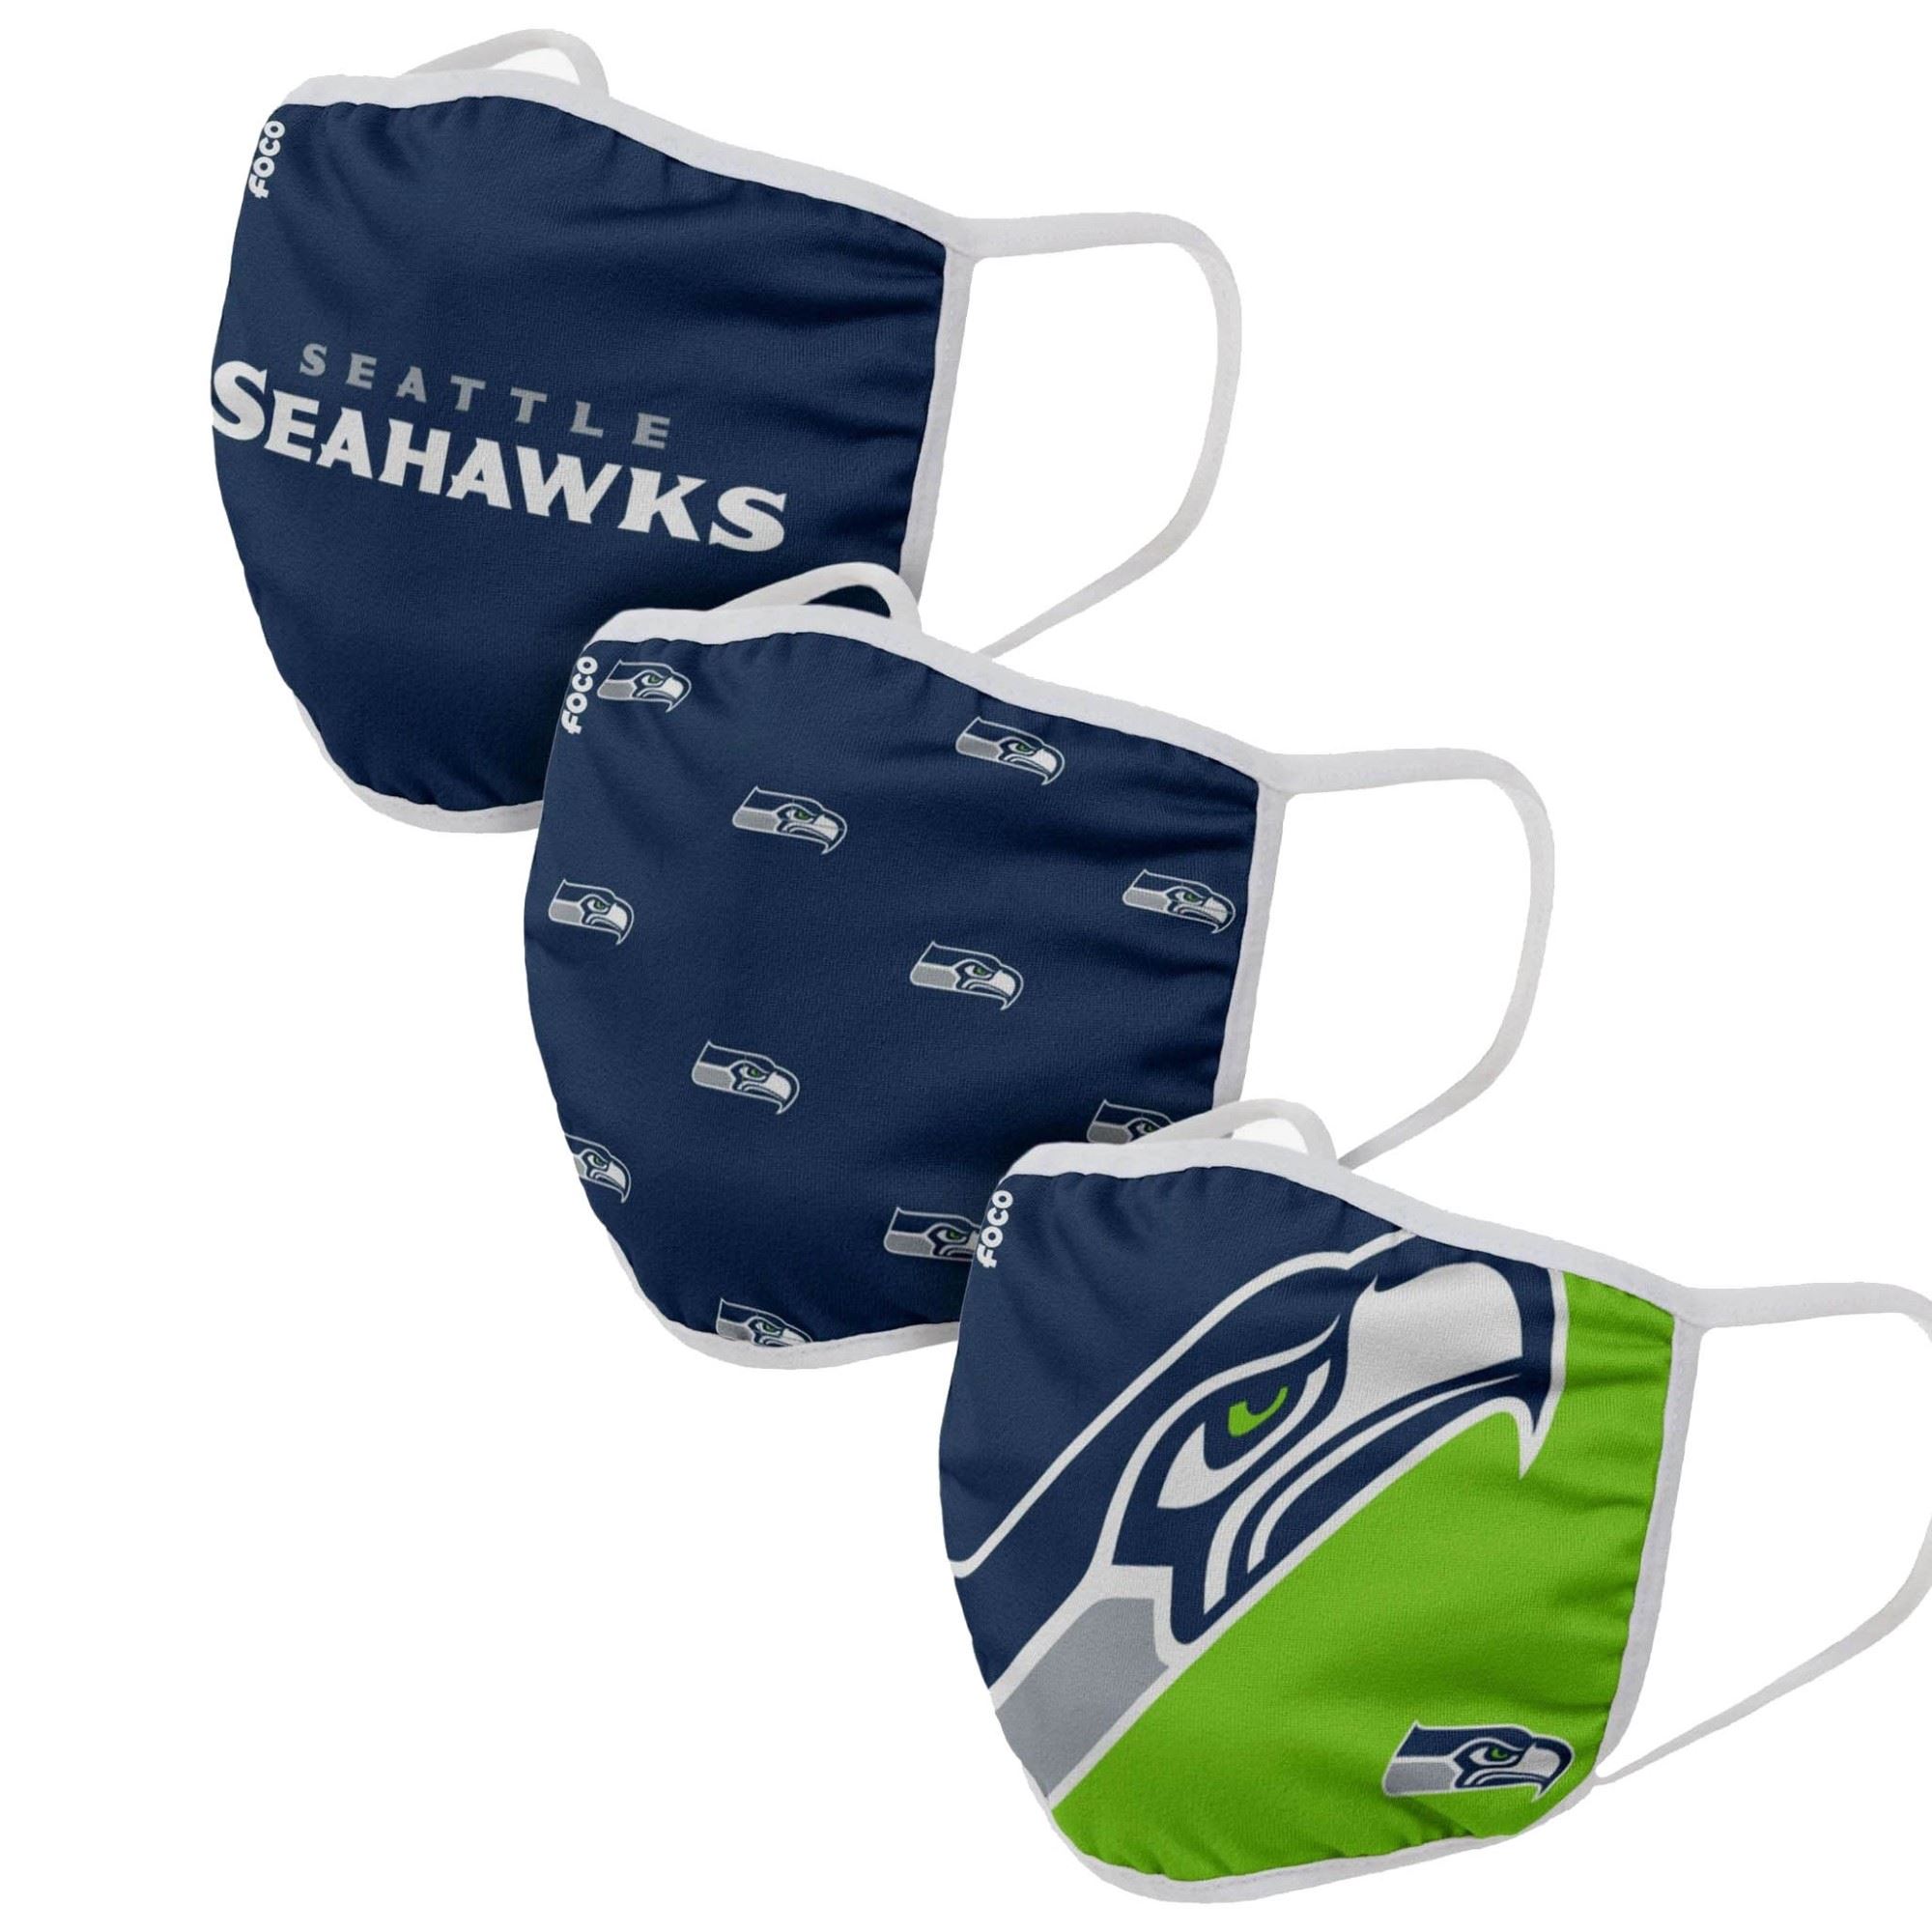 Seattle Seahawks NFL Face Covering 3Pack Face Mask Forever Collectibles